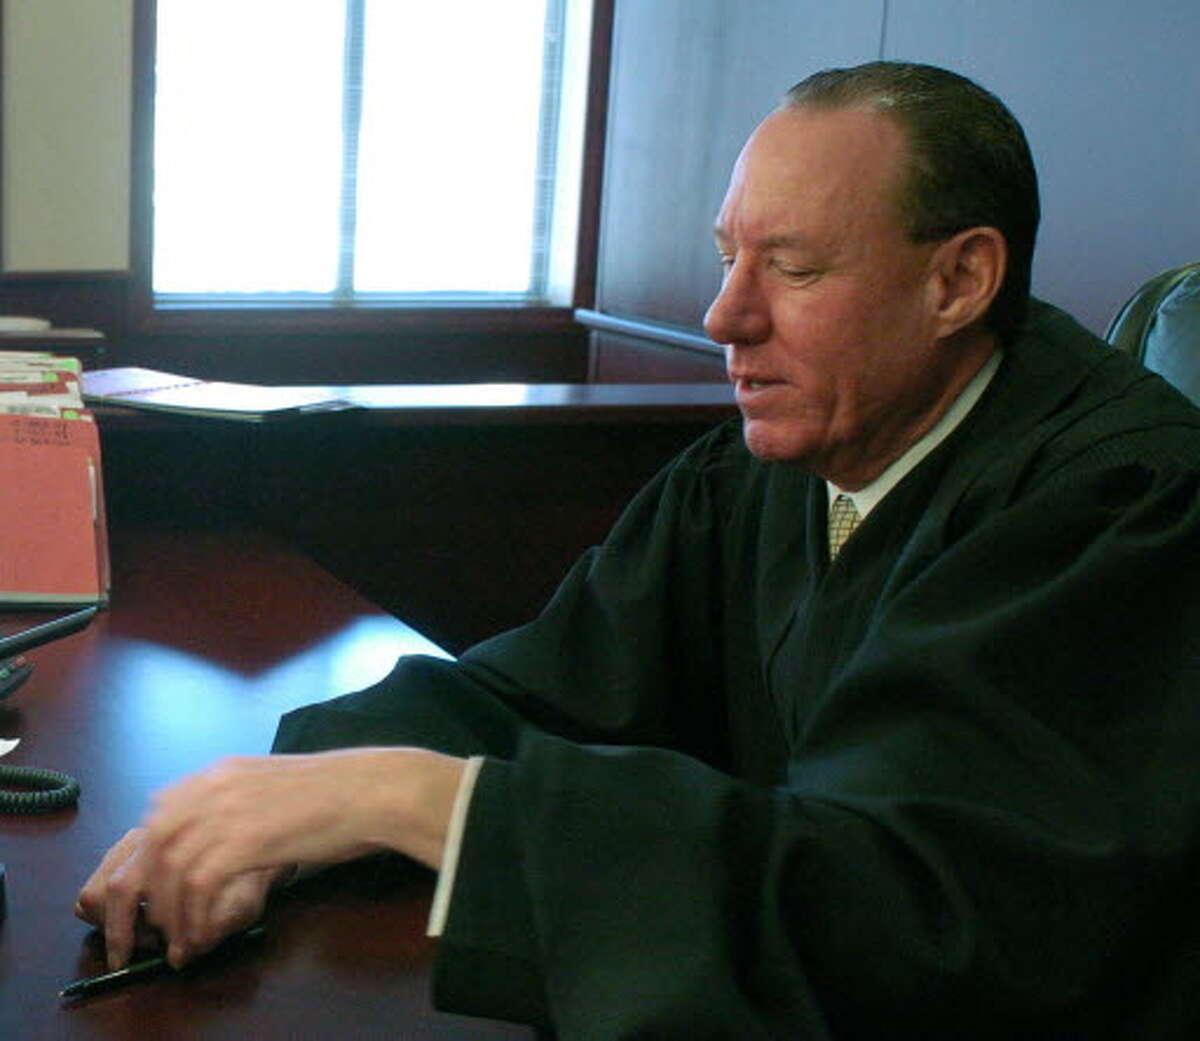 Albany County Family Court Judge Gerard Maney in his courtroom on Monday, March 6, 2006. (Paul Buckowski / Times Union)